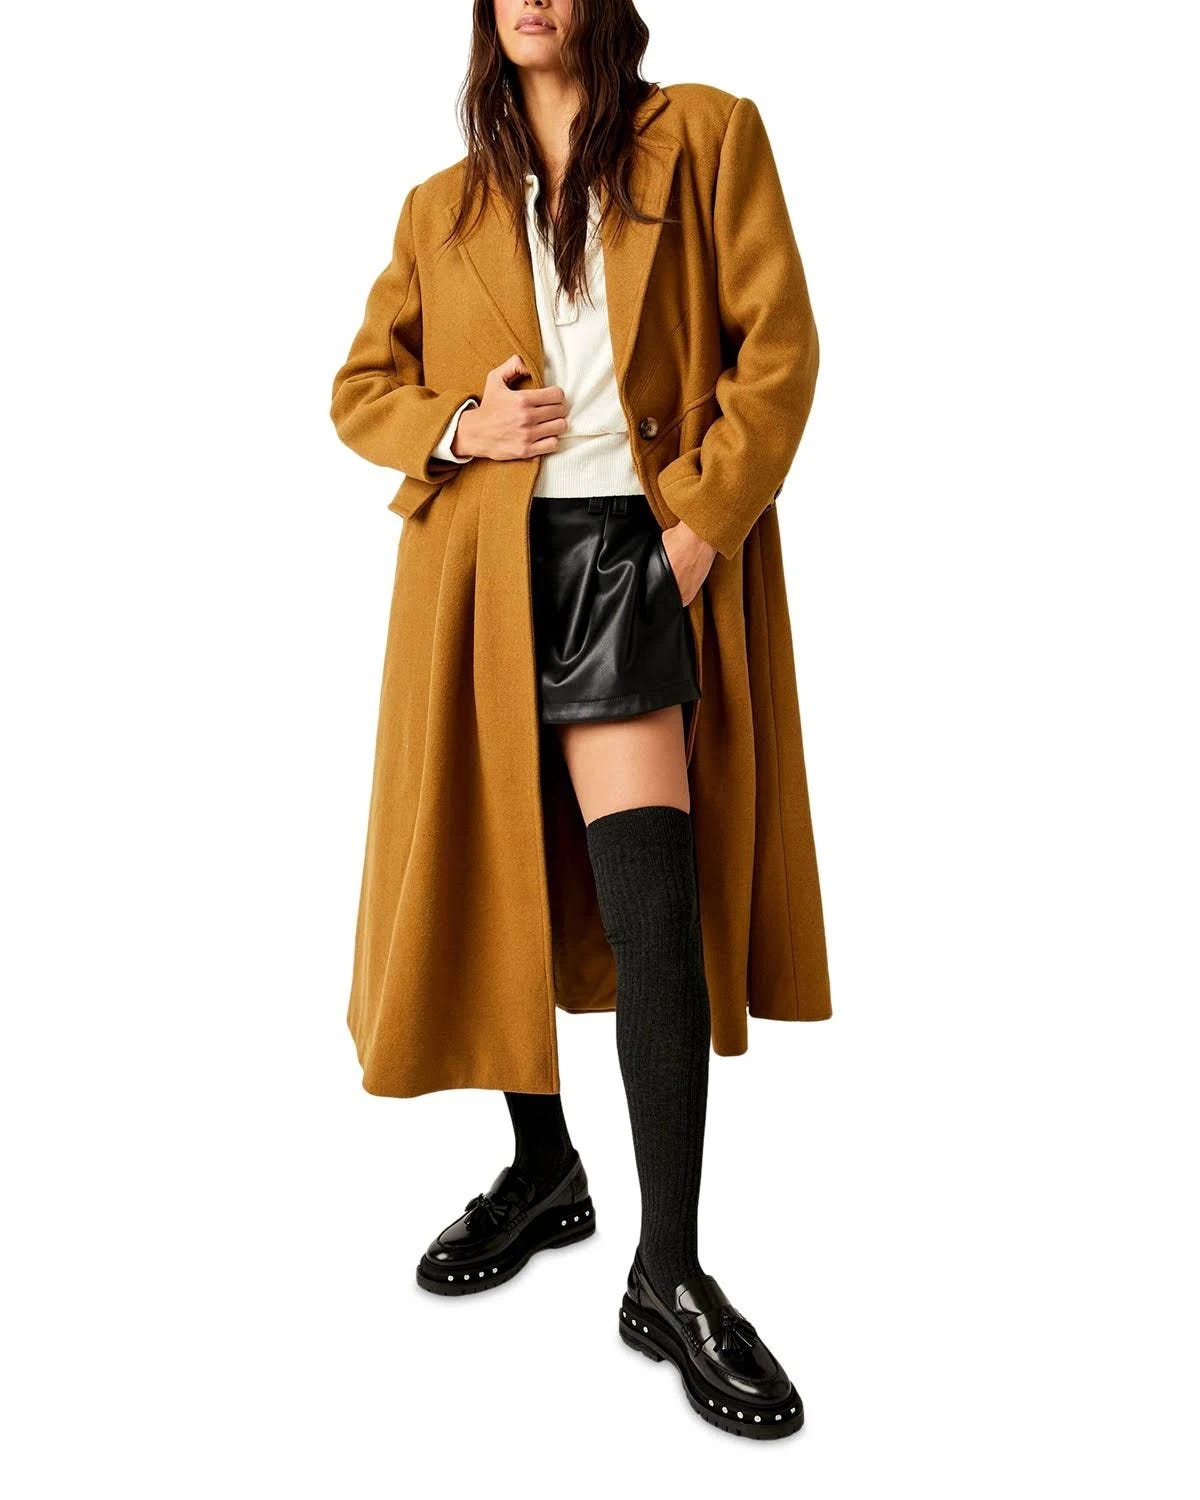 Stylish Women's Beige Peacoat with Contrast Buttons | Image